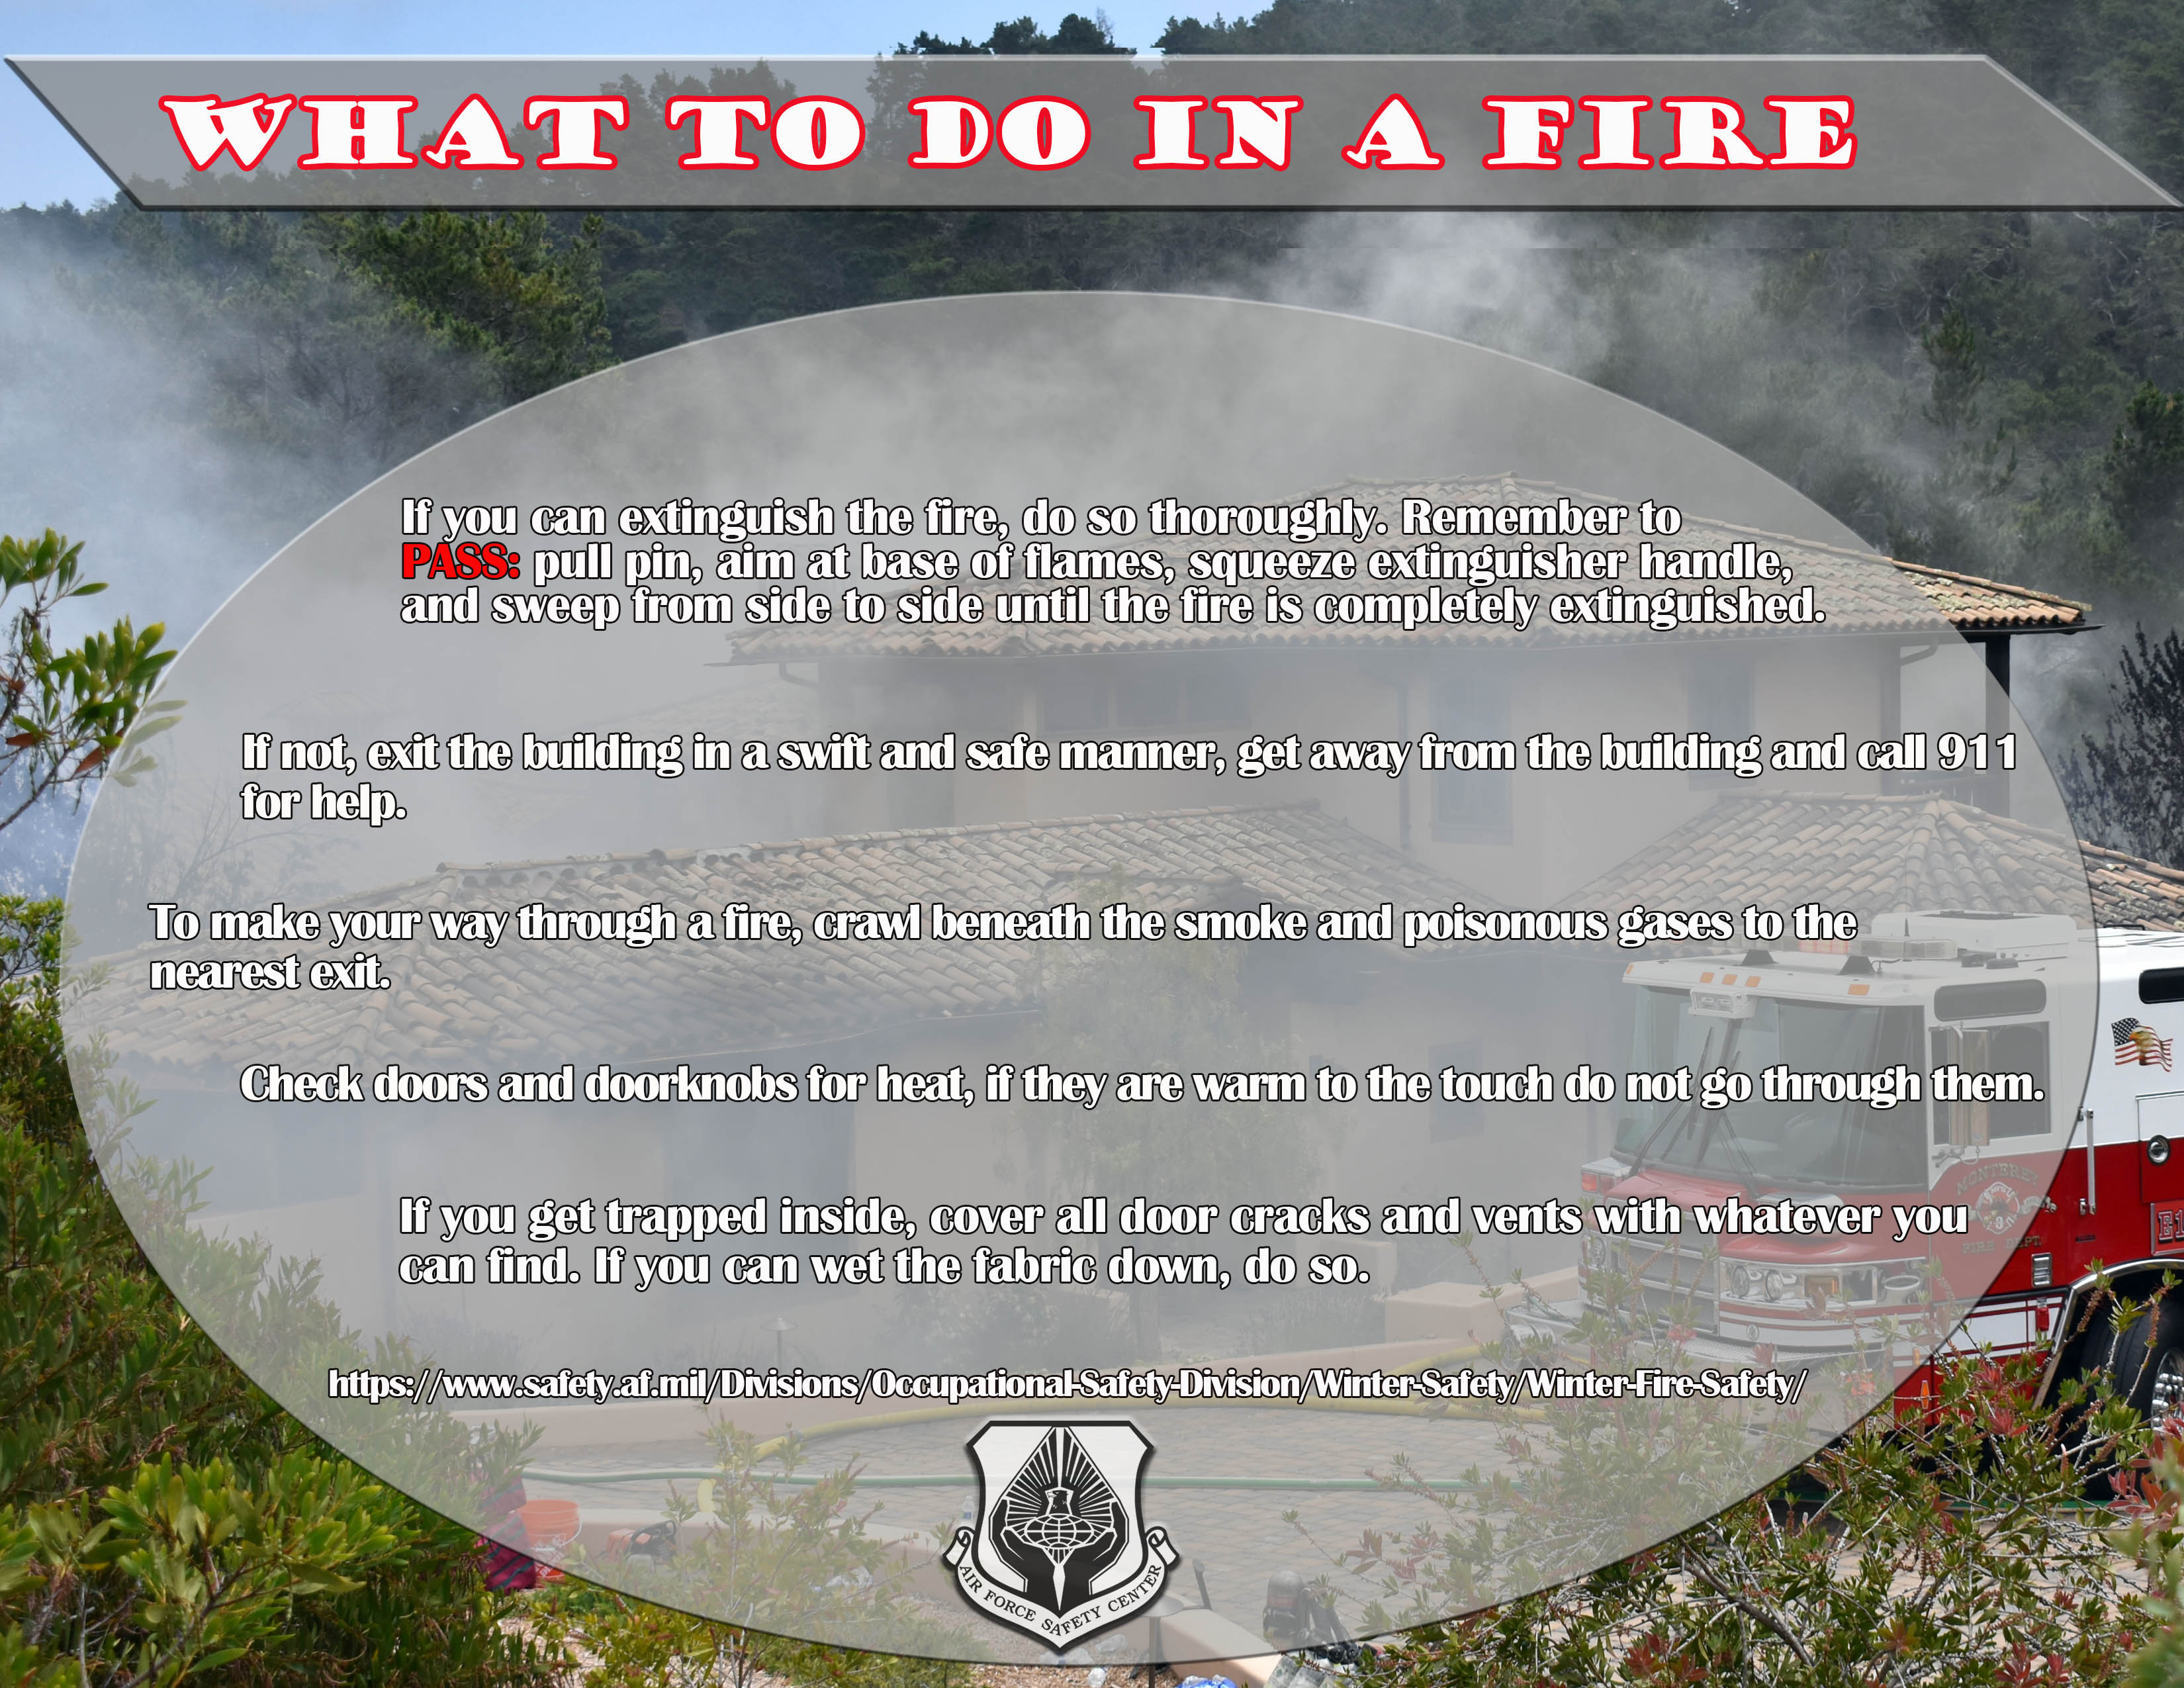 What to do in a fire poster